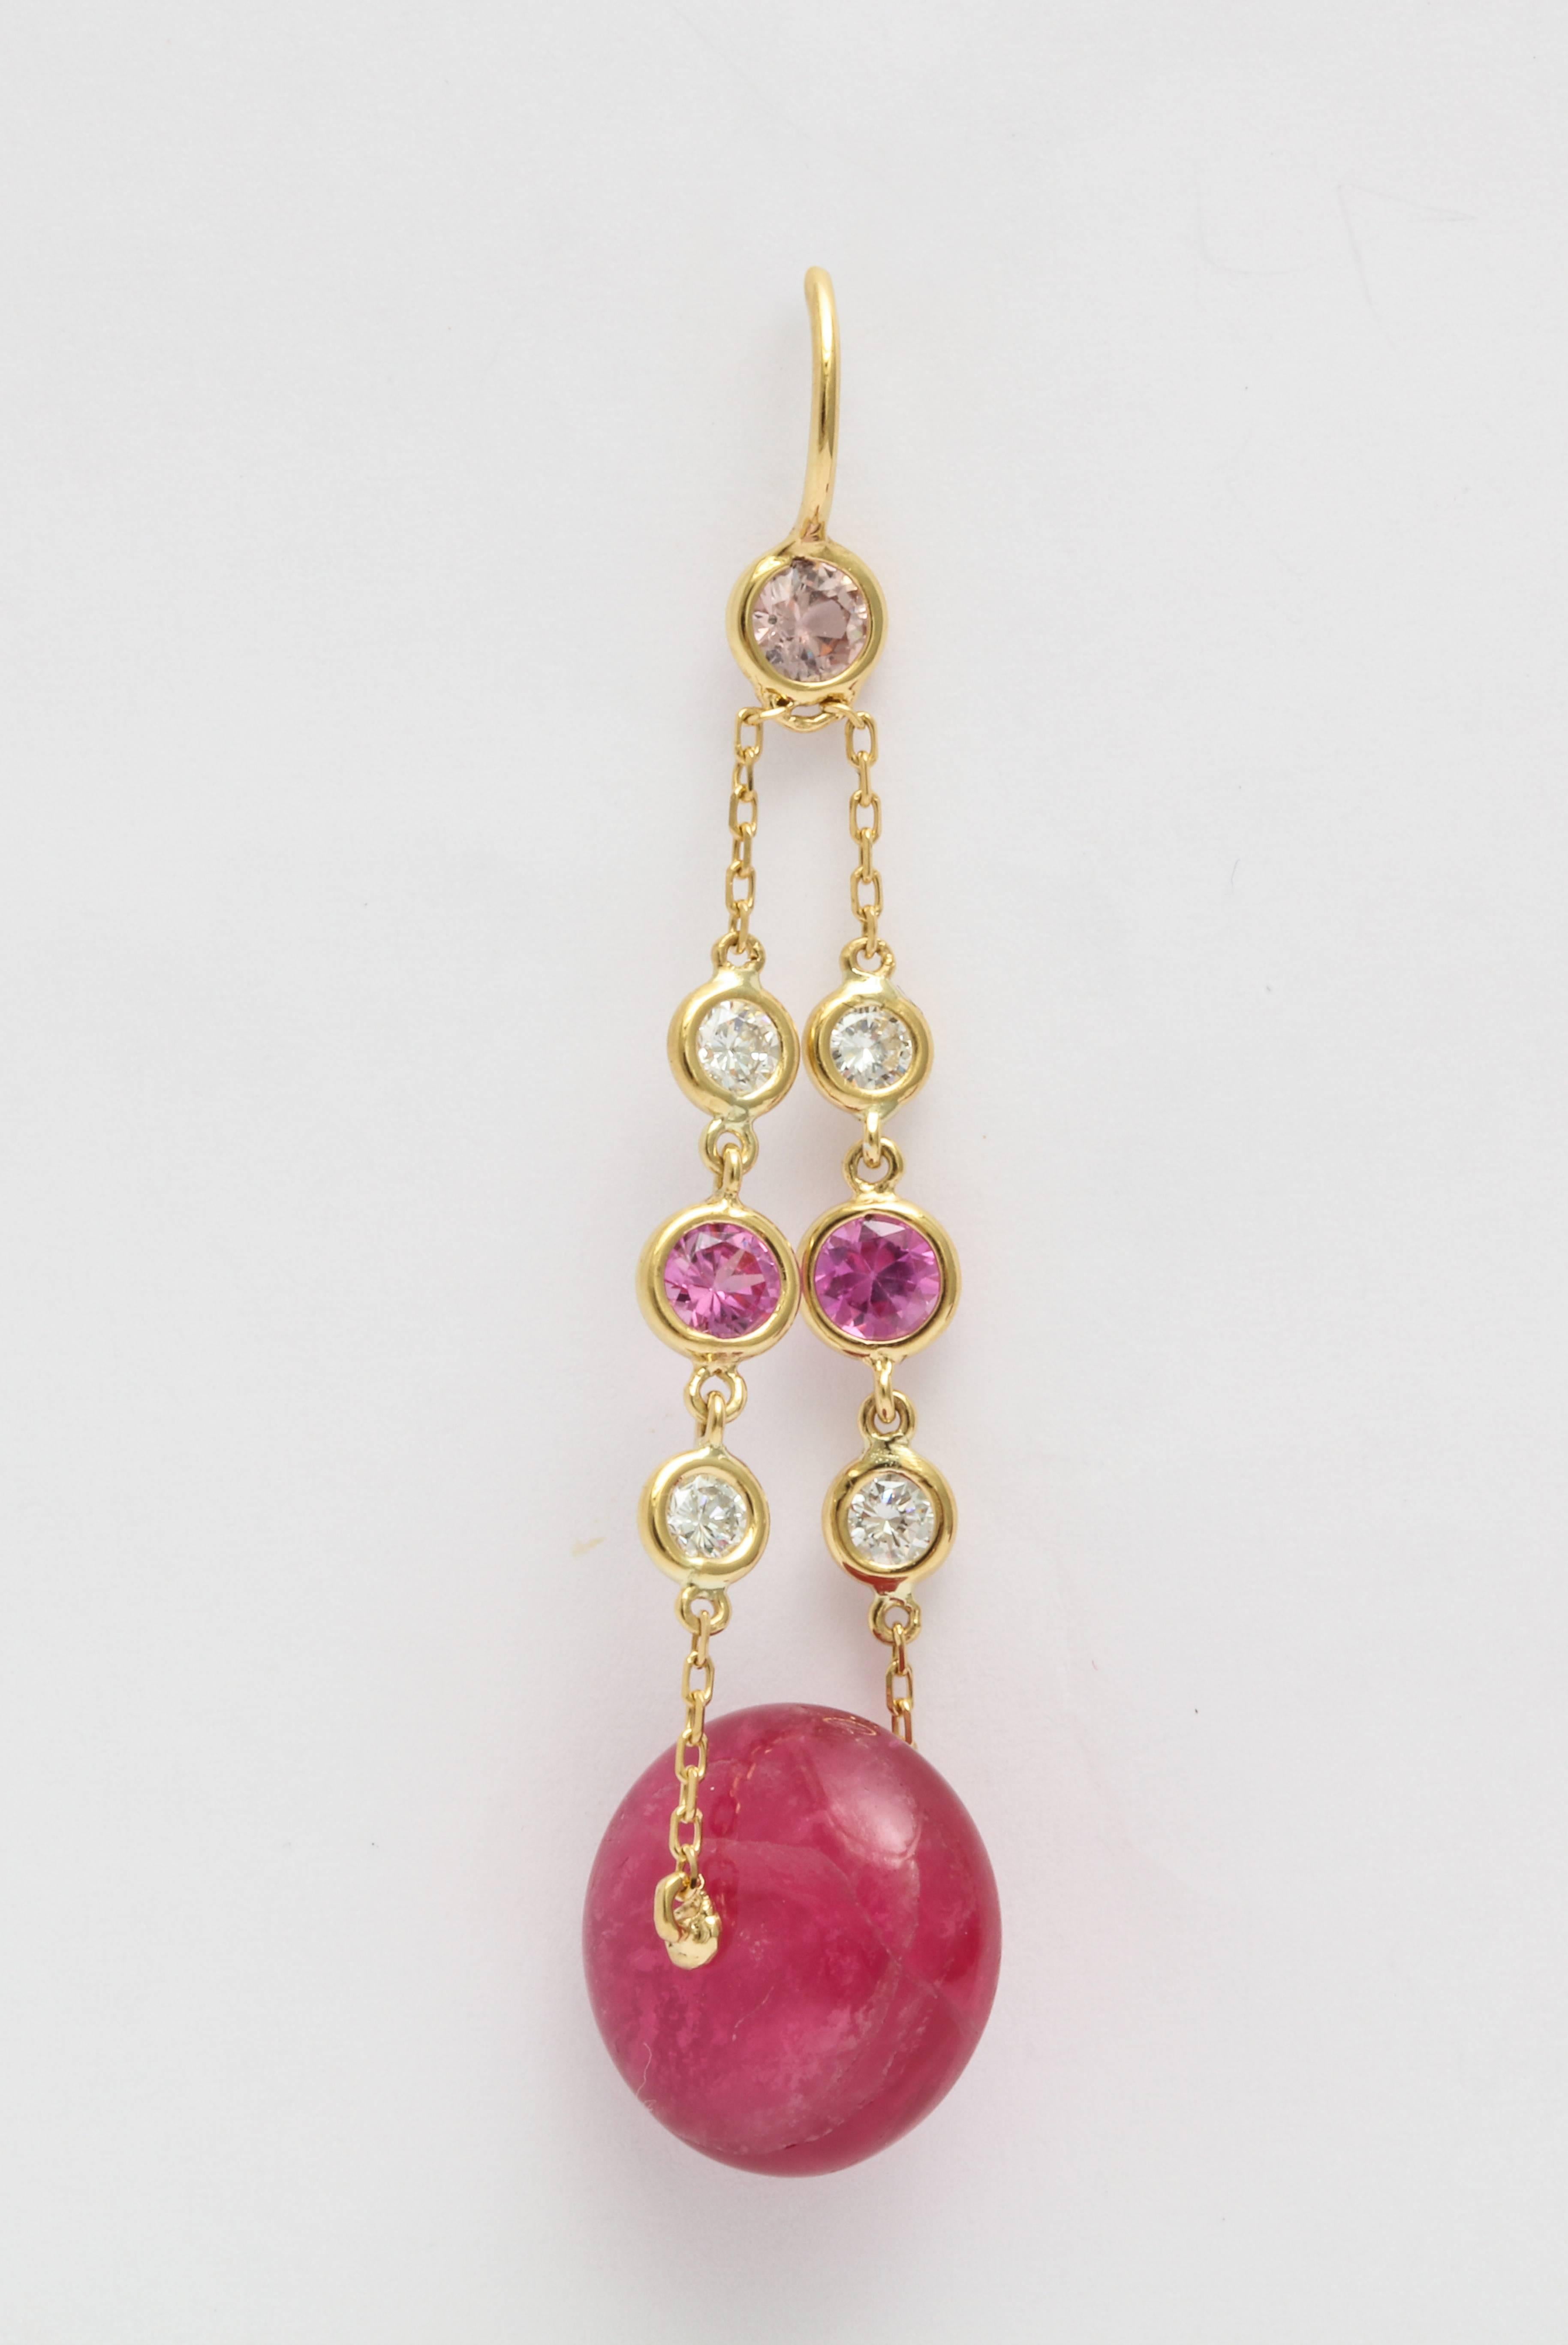 A pair of earrings featuring two large, pink tourmaline beads with a total weight of 22.84 carats. They are suspended from 18 karat yellow gold chain and accented with round pink sapphires and round white brilliant diamonds. The total sapphire